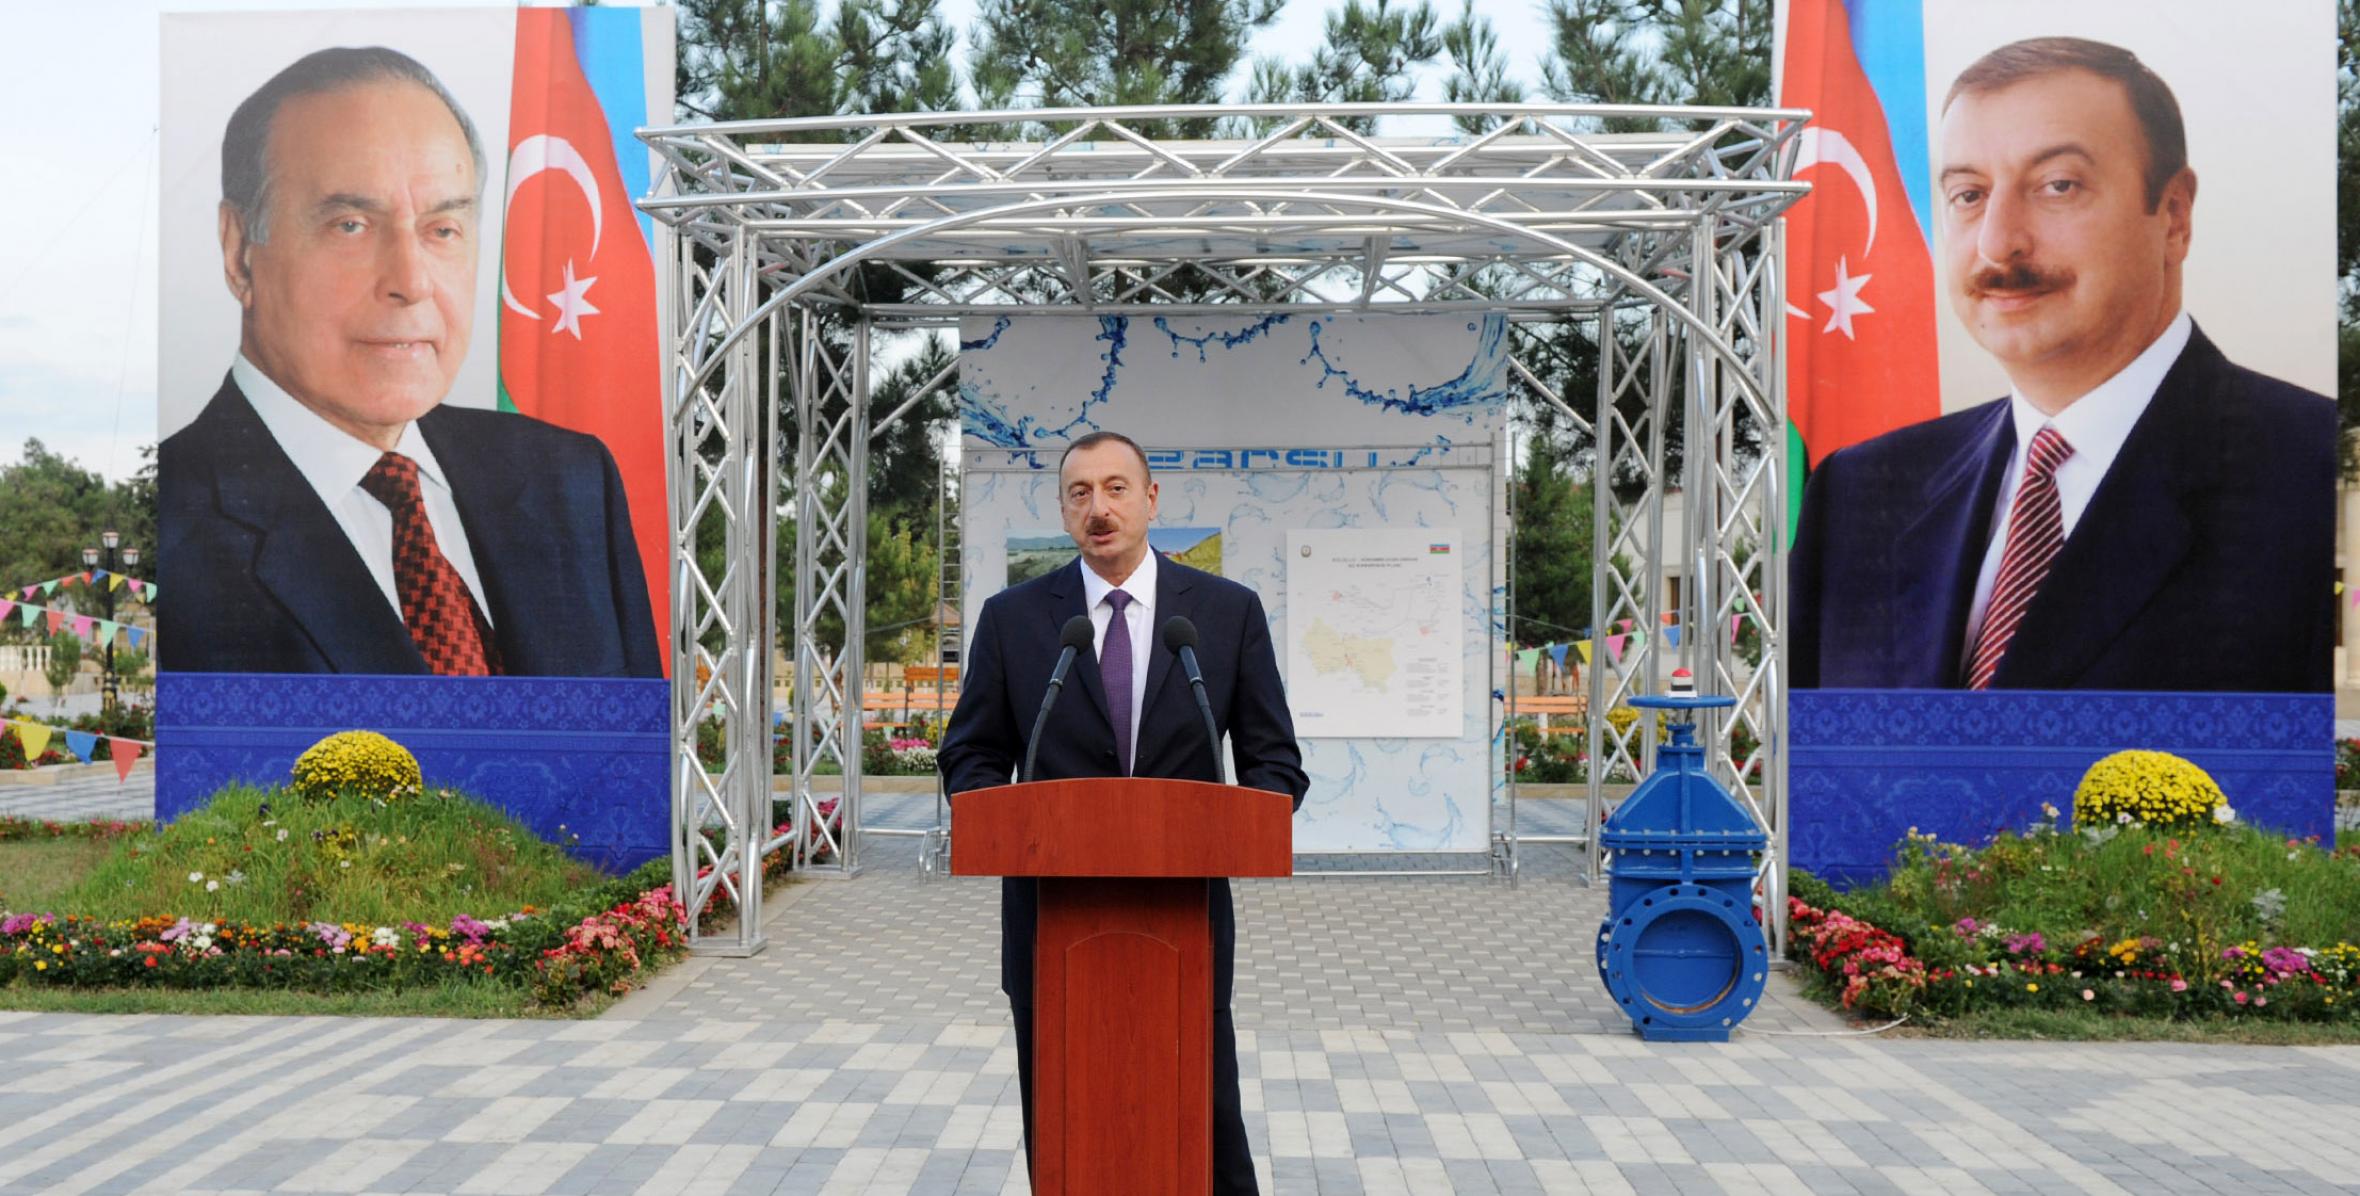 Speech by Ilham Aliyev at the opening of the Kullulu-Zardab water pipe